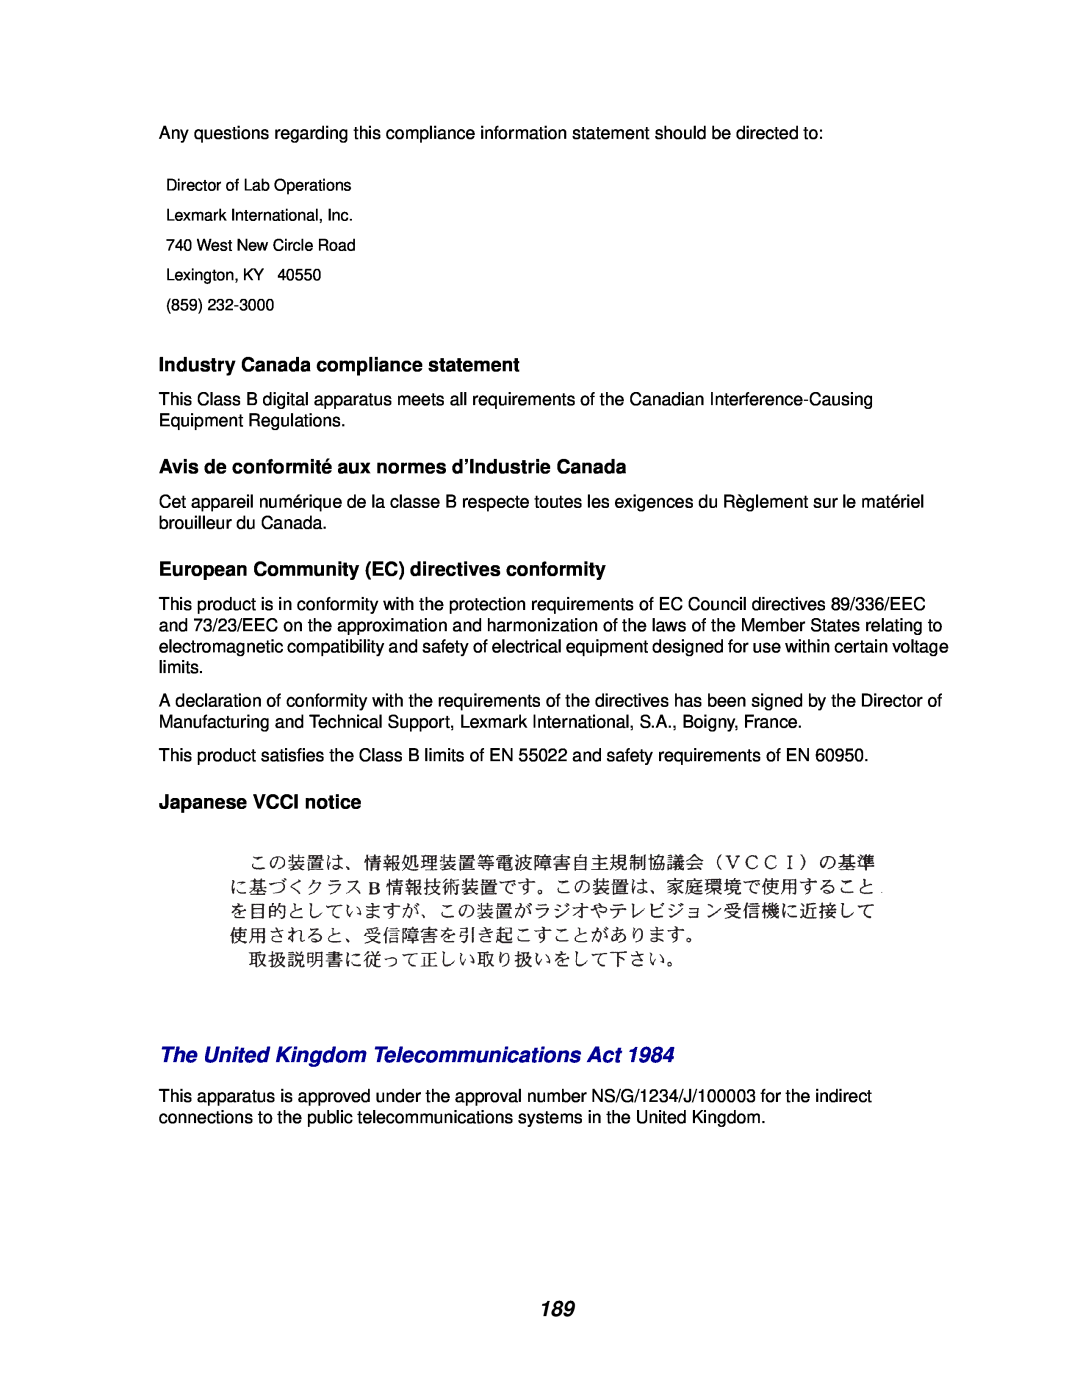 Lexmark 812 manual The United Kingdom Telecommunications Act, Industry Canada compliance statement, Japanese VCCI notice 